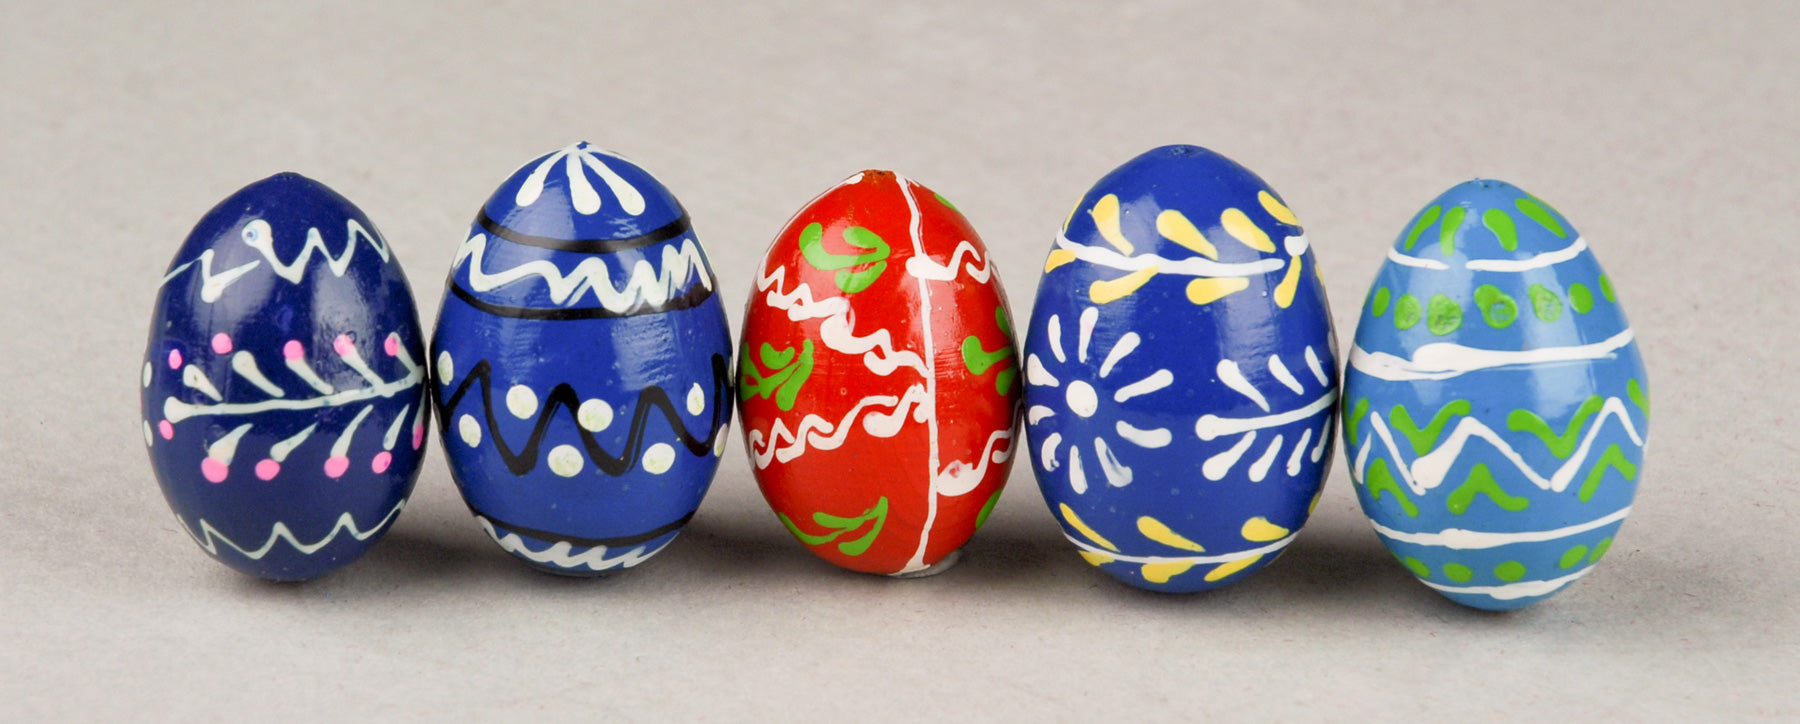 Hand Painted Wooden Eggs for Easter 